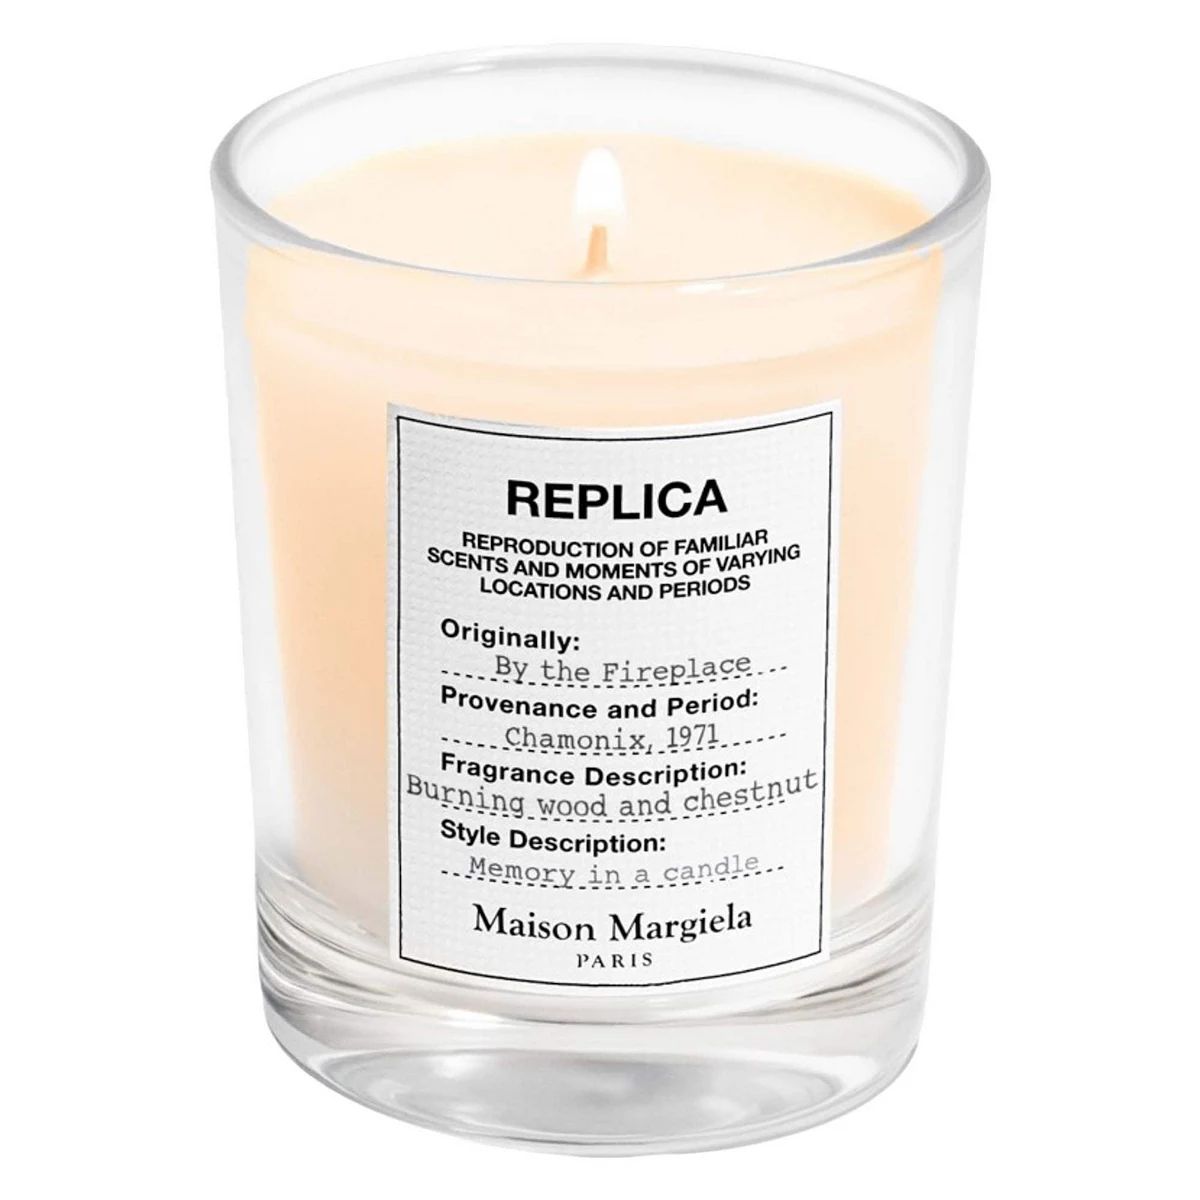 Maison Margiela 'REPLICA' By The Fireplace Scented Candle | Kohl's